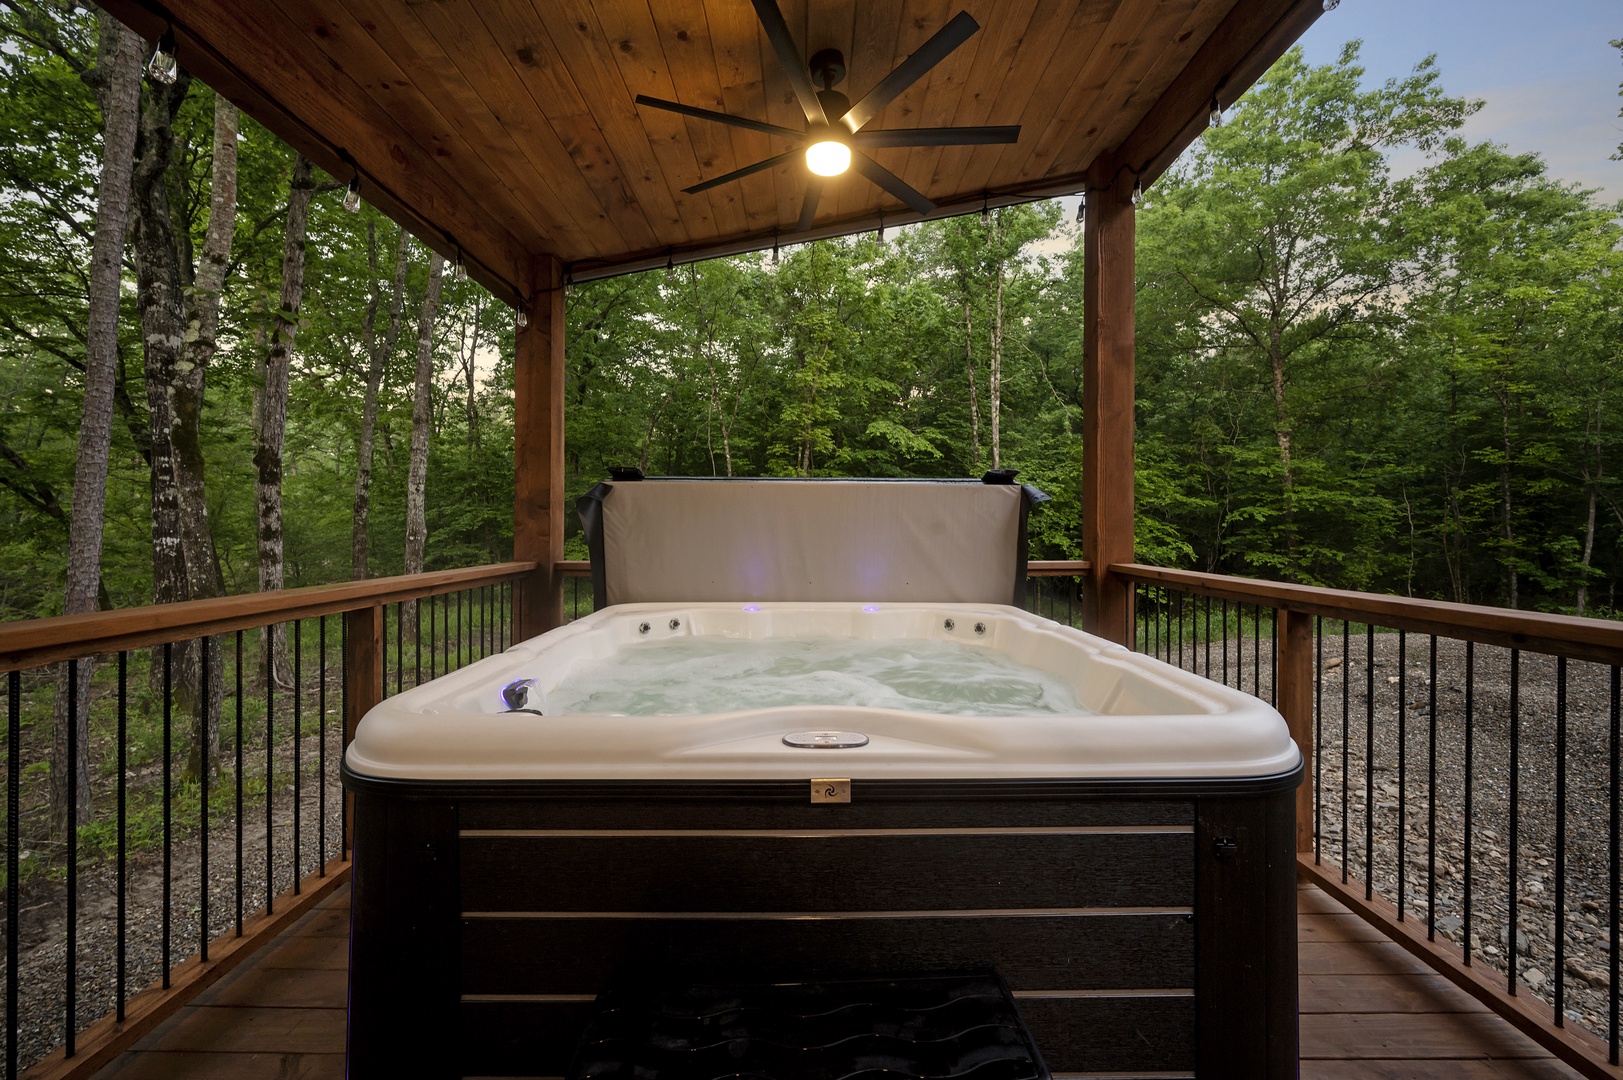 Take a relaxing soak in one of the hot tubs